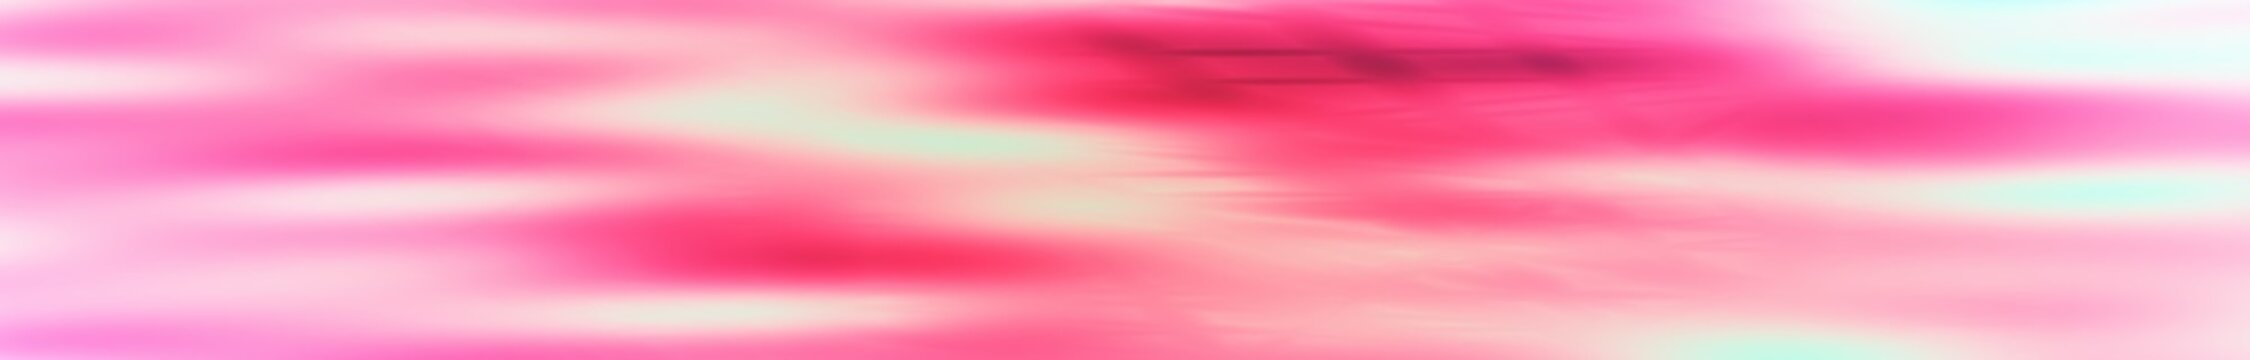 Speed flow background abstract red headers pattern